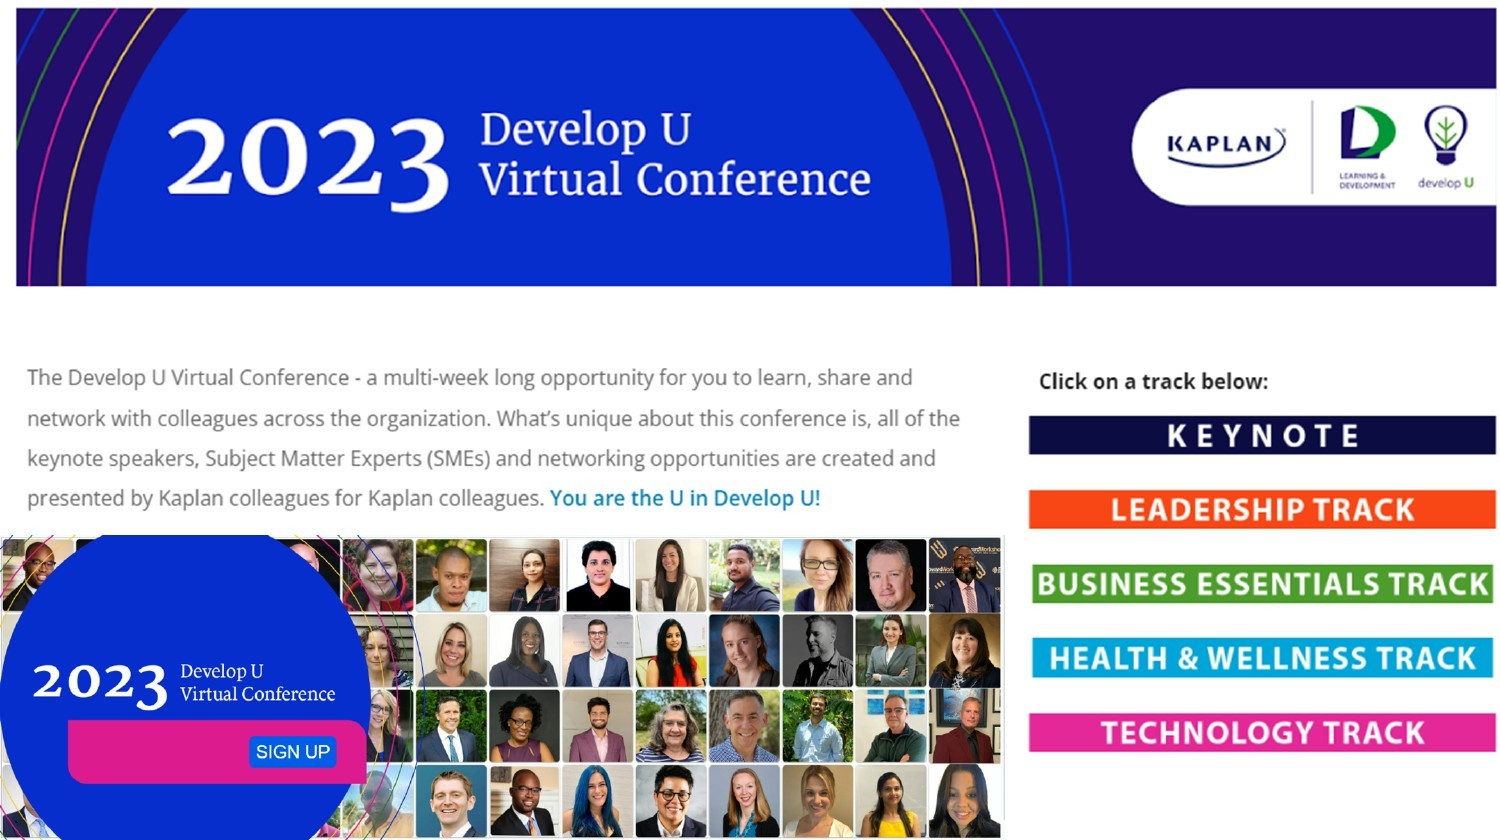 Our annual Develop U Virtual Conference is put on by Kaplan employees for the development of Kaplan employees.